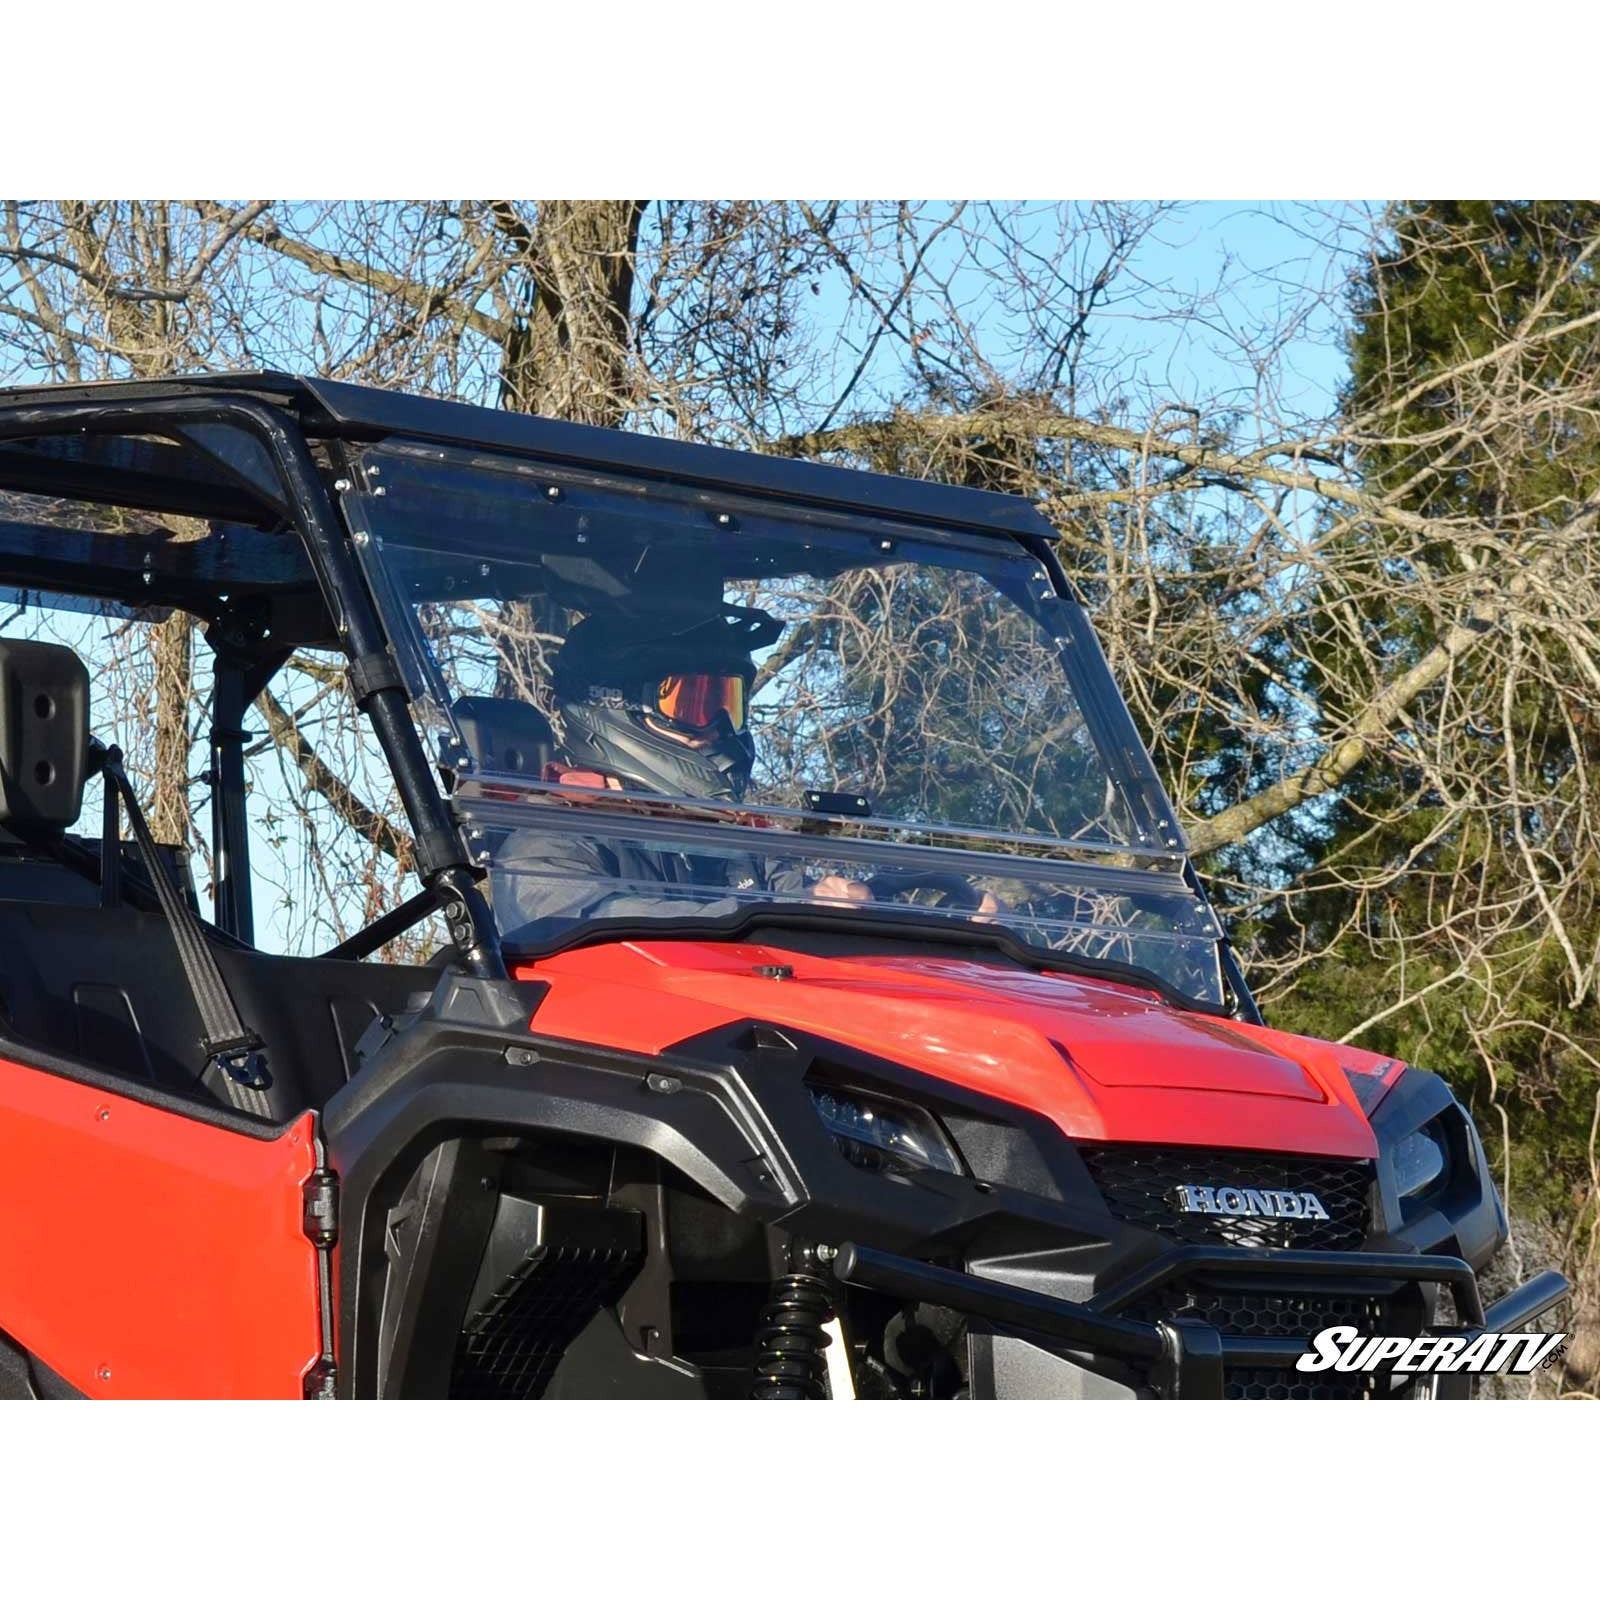 Honda Pioneer/Talon Windshield Cleaner for Polycarbonate